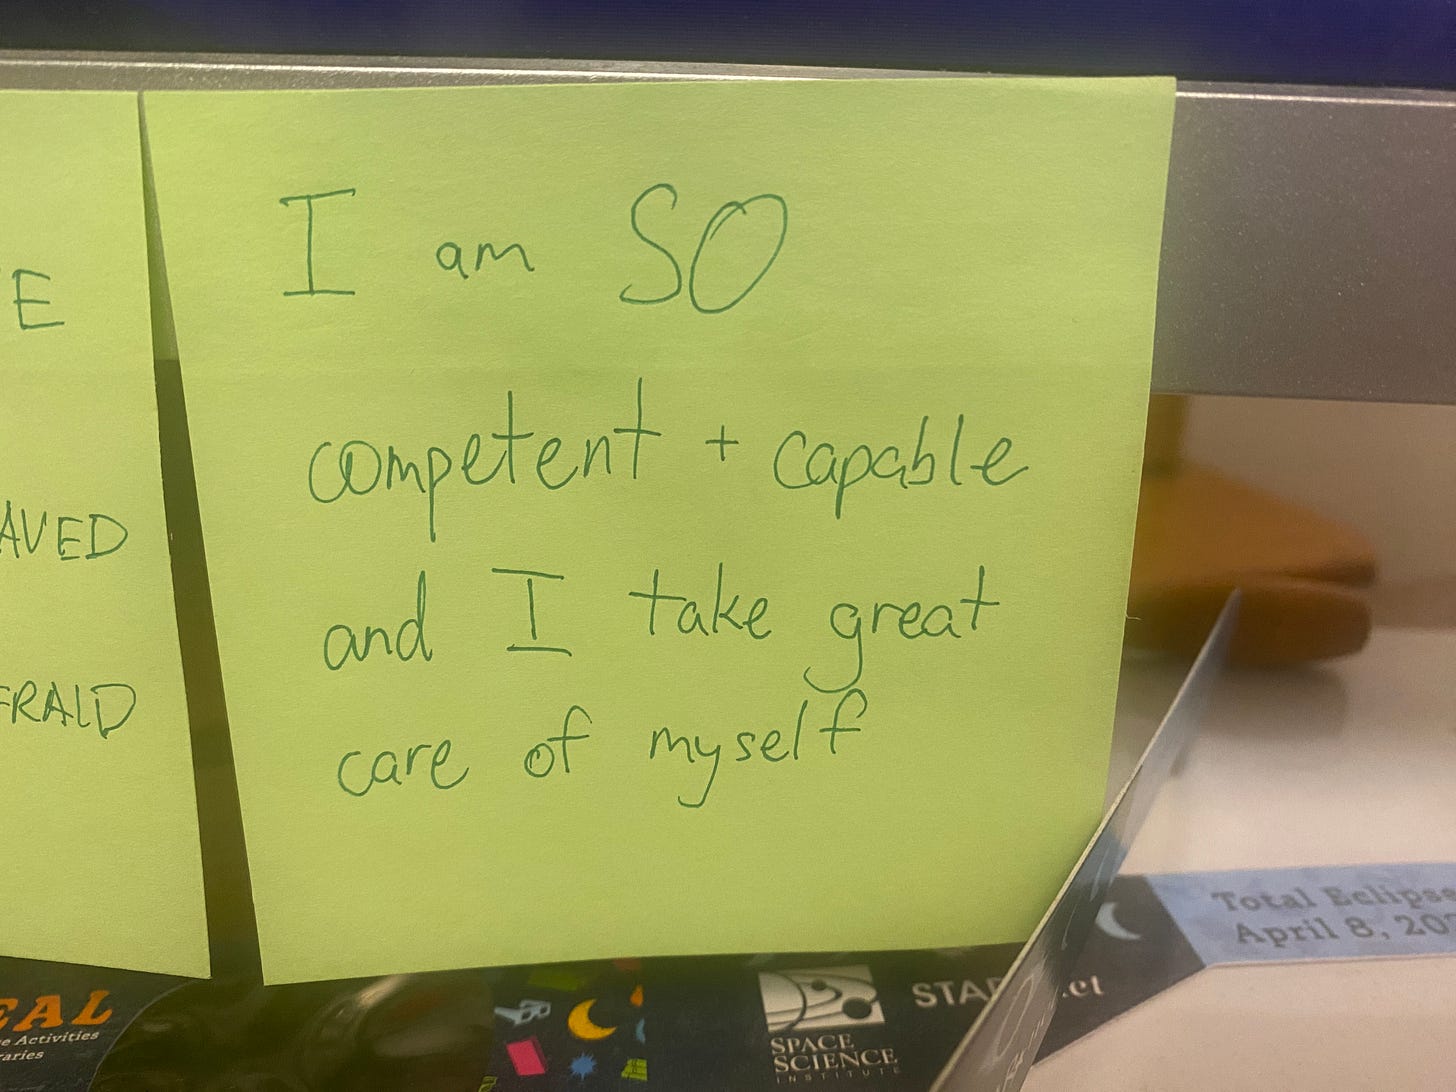 Green Post-It with the words "I am SO competent + capable and I take great care of myself"